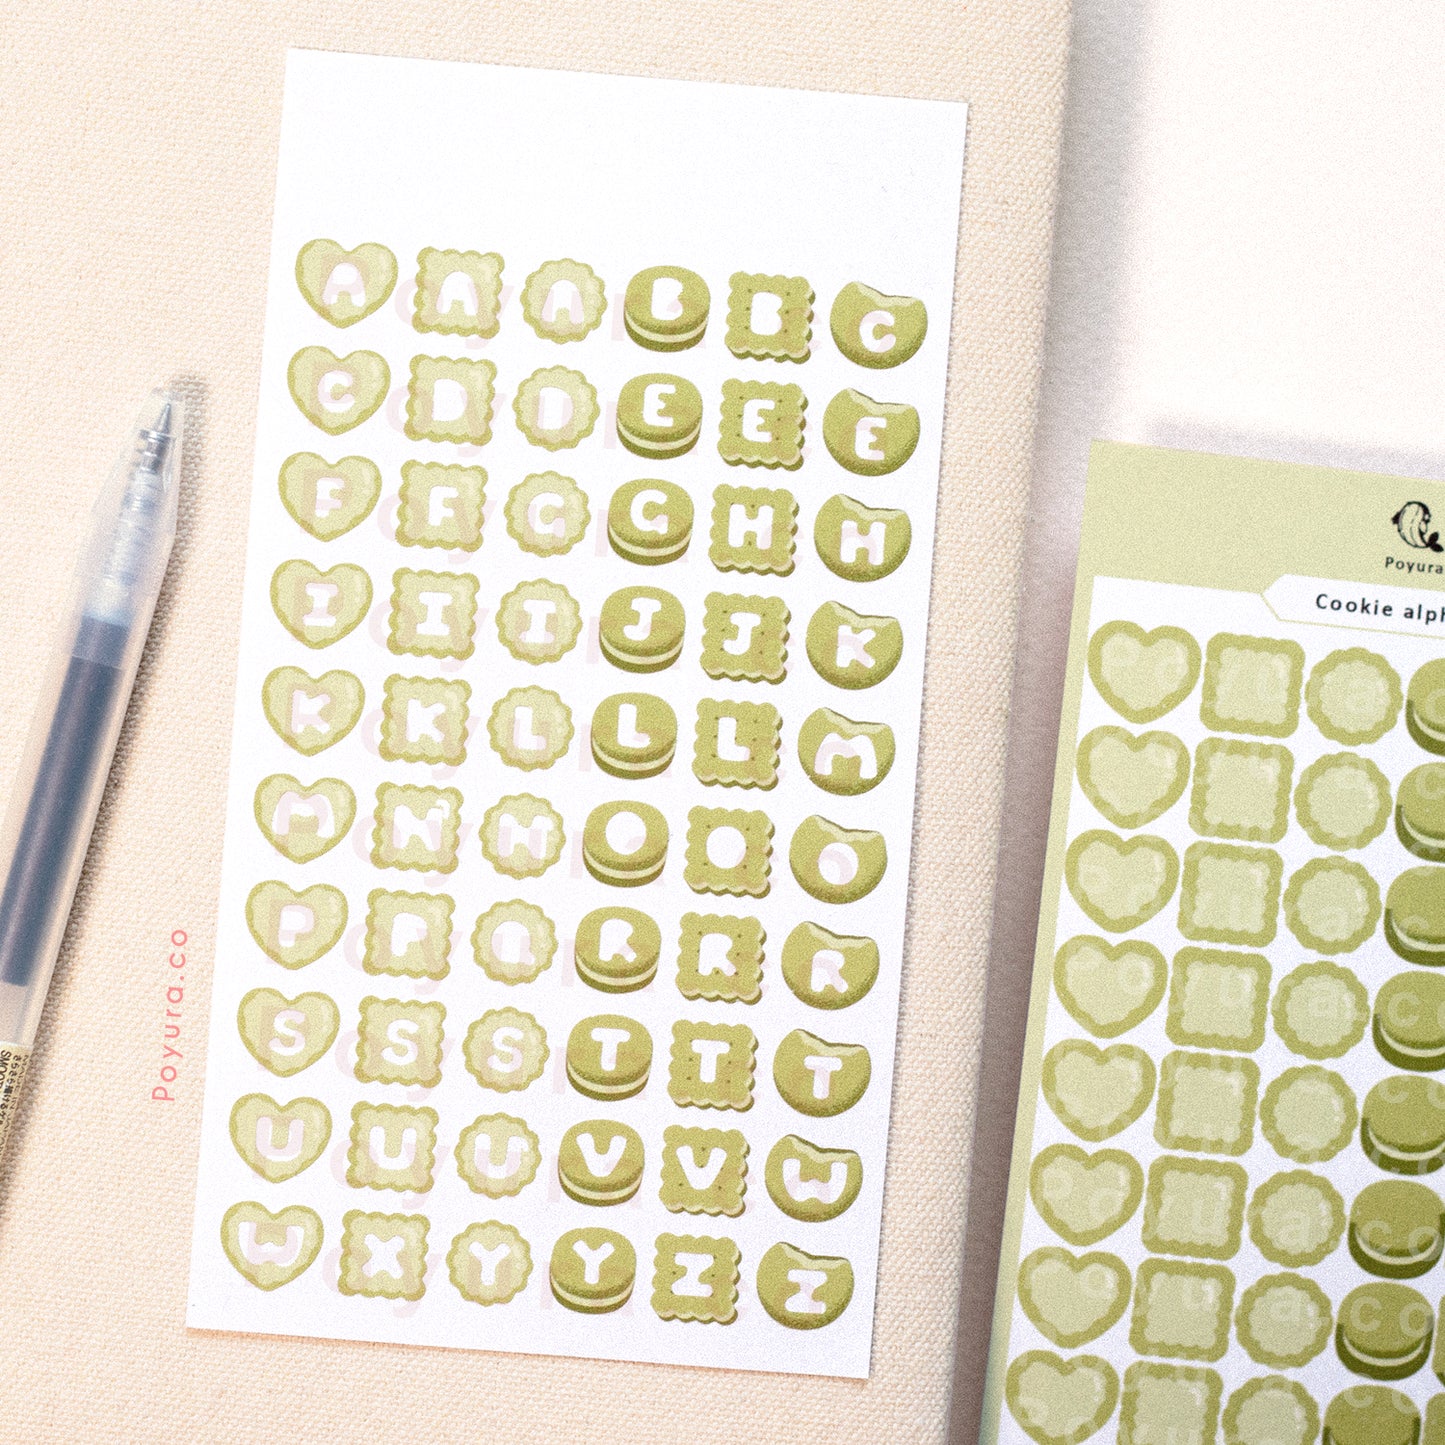 Cookie letter sticker uppercase alphabet ABC deco sticker food snack biscuit cream cookie tin chocolate natural strawberry matcha ube blueberry birthday bday party anniversary celebration colorway color palette korean photocard toploader penpal bujo journal planner sticker sheet tiny confetti sticker study vowel